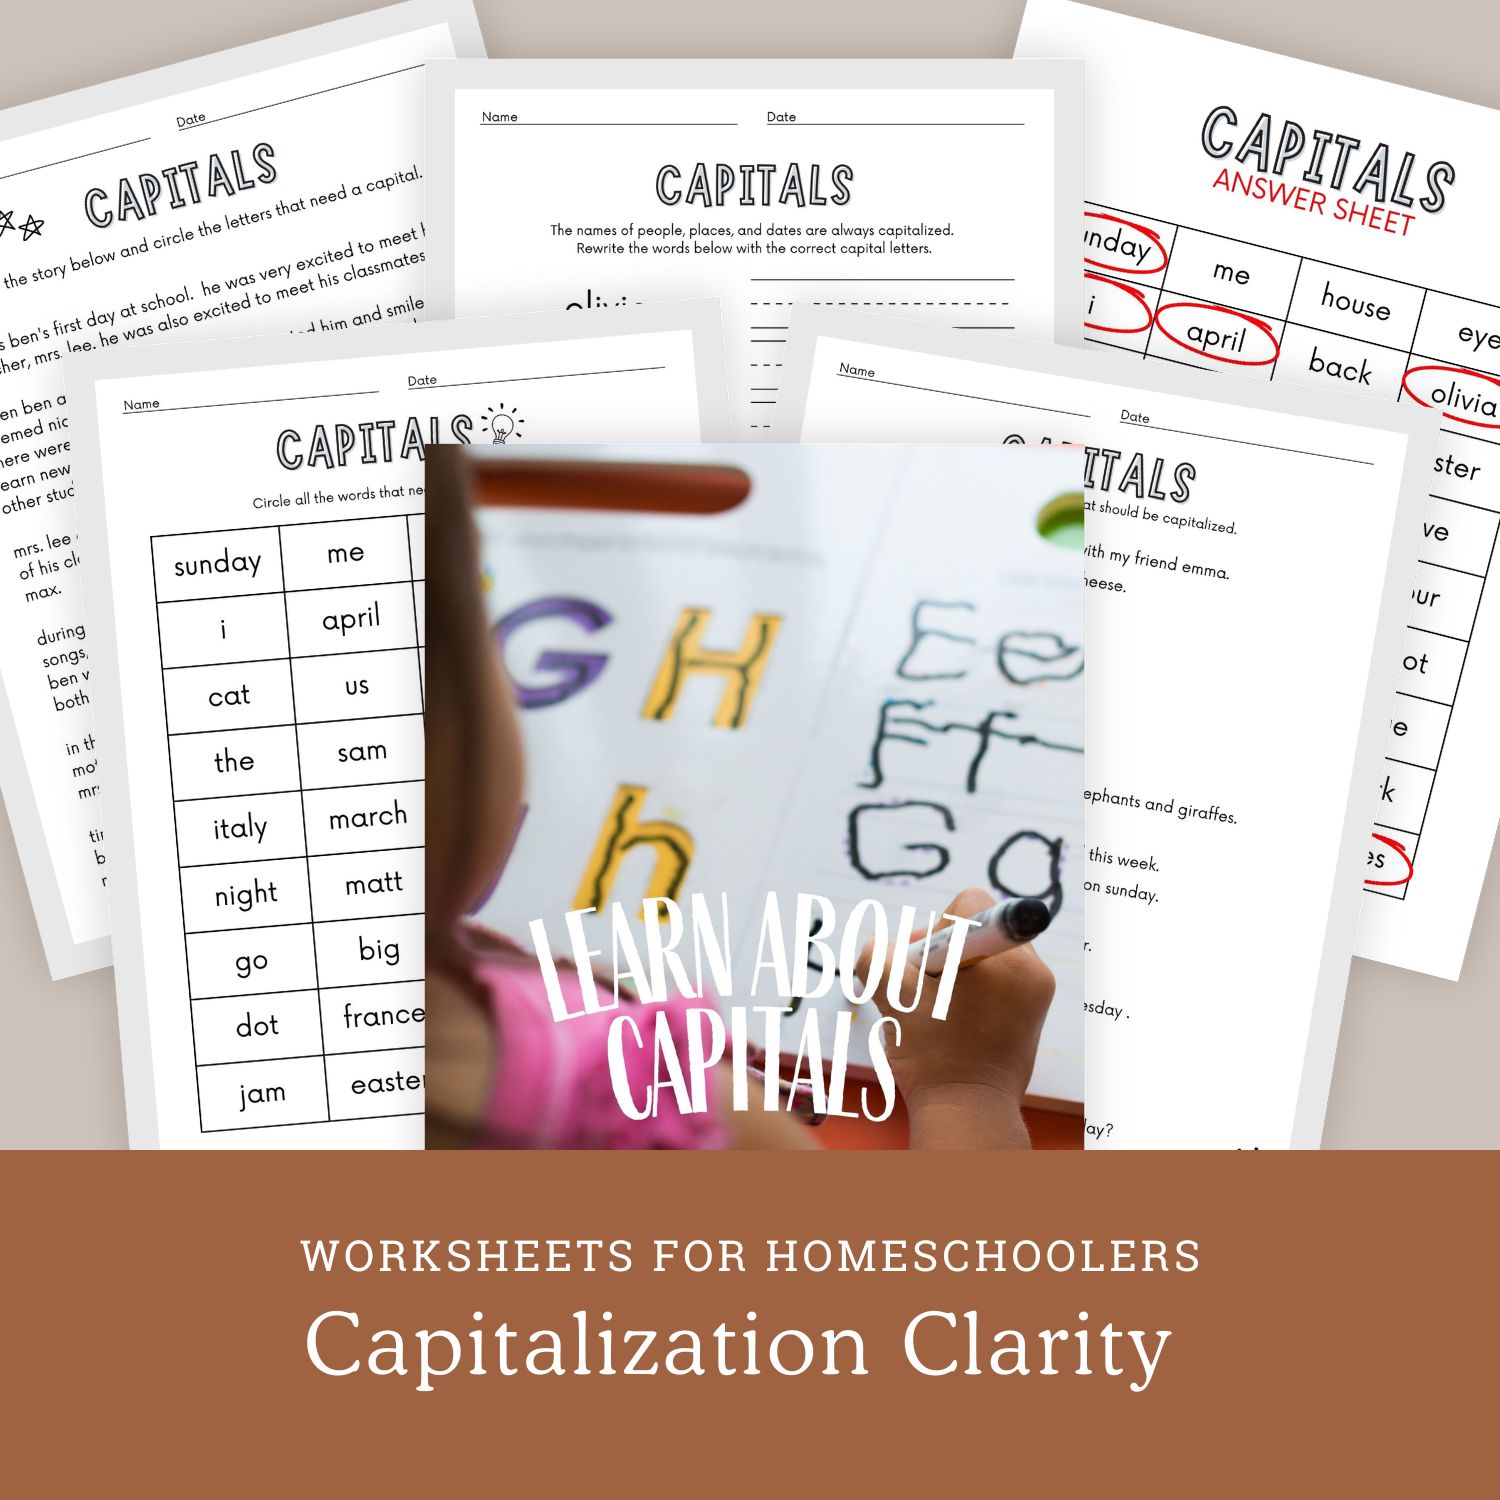 Capitalization Clarity Worksheets for Homeschoolers